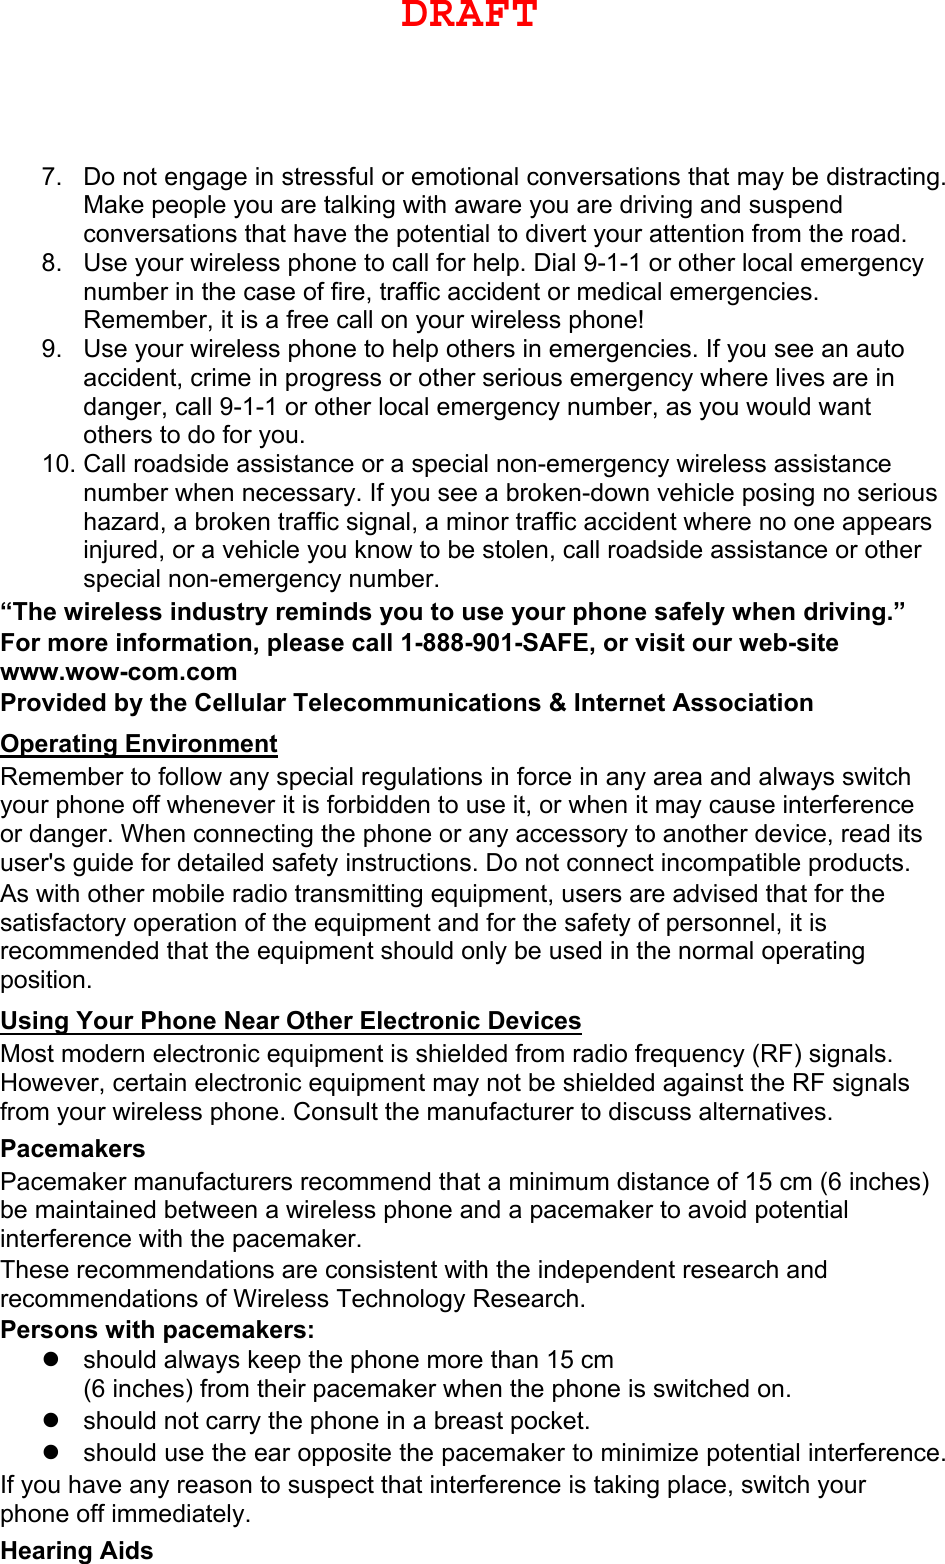 7. Do not engage in stressful or emotional conversations that may be distracting.Make people you are talking with aware you are driving and suspendconversations that have the potential to divert your attention from the road.8. Use your wireless phone to call for help. Dial 9-1-1 or other local emergencynumber in the case of fire, traffic accident or medical emergencies.Remember, it is a free call on your wireless phone!9. Use your wireless phone to help others in emergencies. If you see an autoaccident, crime in progress or other serious emergency where lives are indanger, call 9-1-1 or other local emergency number, as you would wantothers to do for you.10. Call roadside assistance or a special non-emergency wireless assistancenumber when necessary. If you see a broken-down vehicle posing no serioushazard, a broken traffic signal, a minor traffic accident where no one appearsinjured, or a vehicle you know to be stolen, call roadside assistance or otherspecial non-emergency number.“The wireless industry reminds you to use your phone safely when driving.” For more information, please call 1-888-901-SAFE, or visit our web-site www.wow-com.com Provided by the Cellular Telecommunications &amp; Internet Association Operating Environment Remember to follow any special regulations in force in any area and always switch your phone off whenever it is forbidden to use it, or when it may cause interference or danger. When connecting the phone or any accessory to another device, read its user&apos;s guide for detailed safety instructions. Do not connect incompatible products. As with other mobile radio transmitting equipment, users are advised that for the satisfactory operation of the equipment and for the safety of personnel, it is recommended that the equipment should only be used in the normal operating position. Using Your Phone Near Other Electronic Devices Most modern electronic equipment is shielded from radio frequency (RF) signals. However, certain electronic equipment may not be shielded against the RF signals from your wireless phone. Consult the manufacturer to discuss alternatives. Pacemakers Pacemaker manufacturers recommend that a minimum distance of 15 cm (6 inches) be maintained between a wireless phone and a pacemaker to avoid potential interference with the pacemaker. These recommendations are consistent with the independent research and recommendations of Wireless Technology Research. Persons with pacemakers: should always keep the phone more than 15 cm(6 inches) from their pacemaker when the phone is switched on.should not carry the phone in a breast pocket.should use the ear opposite the pacemaker to minimize potential interference.If you have any reason to suspect that interference is taking place, switch your phone off immediately. Hearing Aids DRAFT